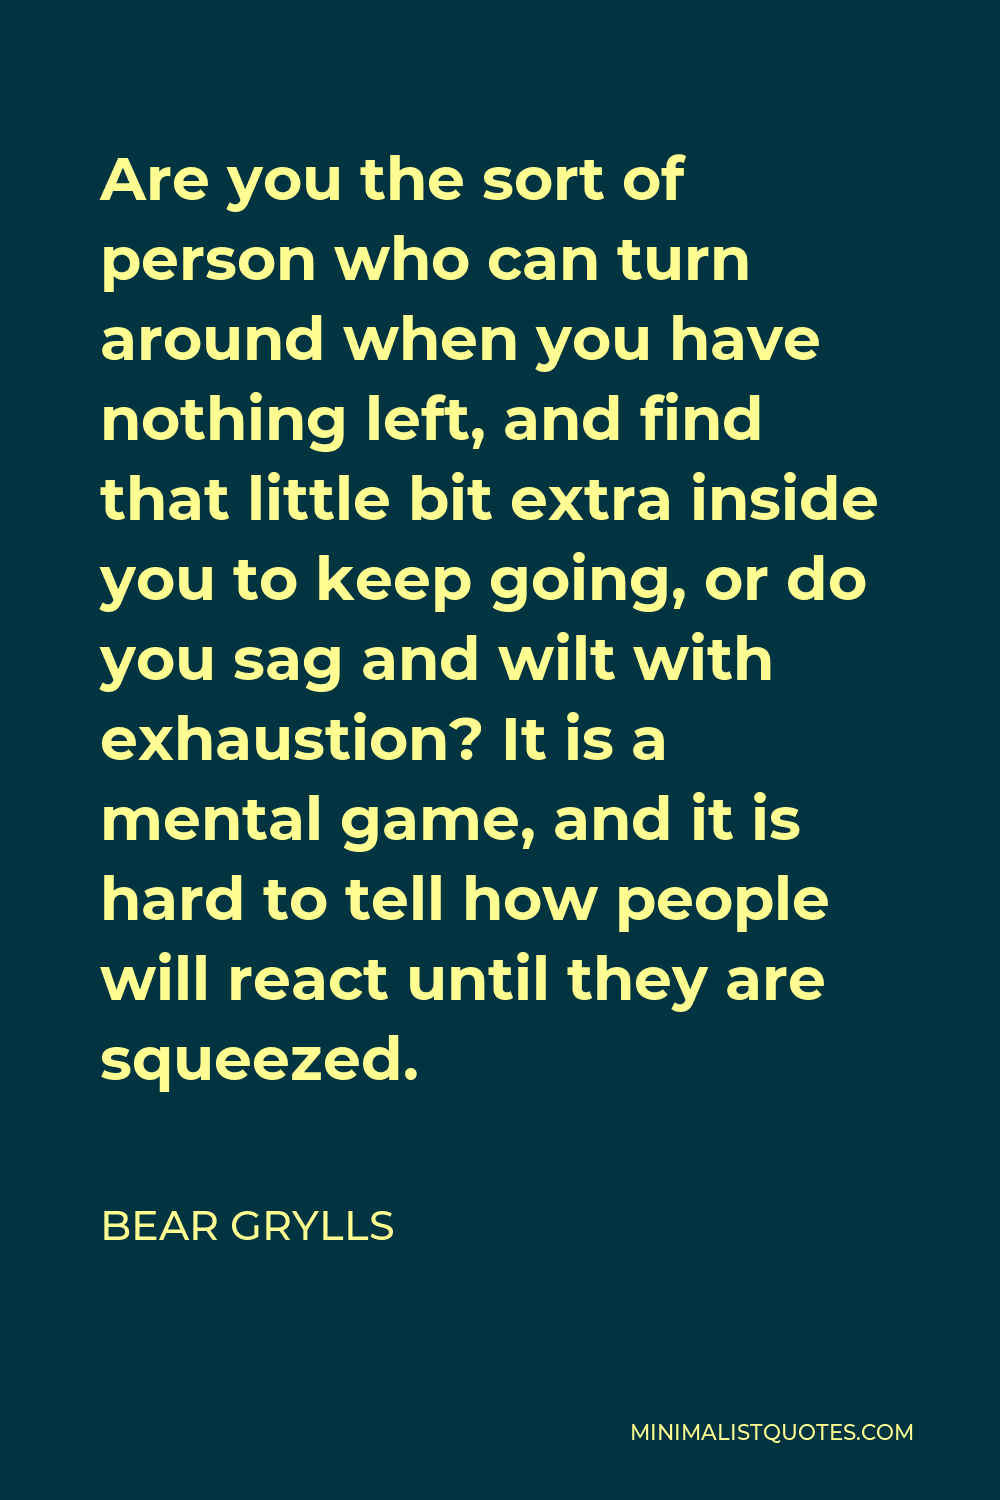 Bear Grylls Quote - Are you the sort of person who can turn around when you have nothing left, and find that little bit extra inside you to keep going, or do you sag and wilt with exhaustion? It is a mental game, and it is hard to tell how people will react until they are squeezed.